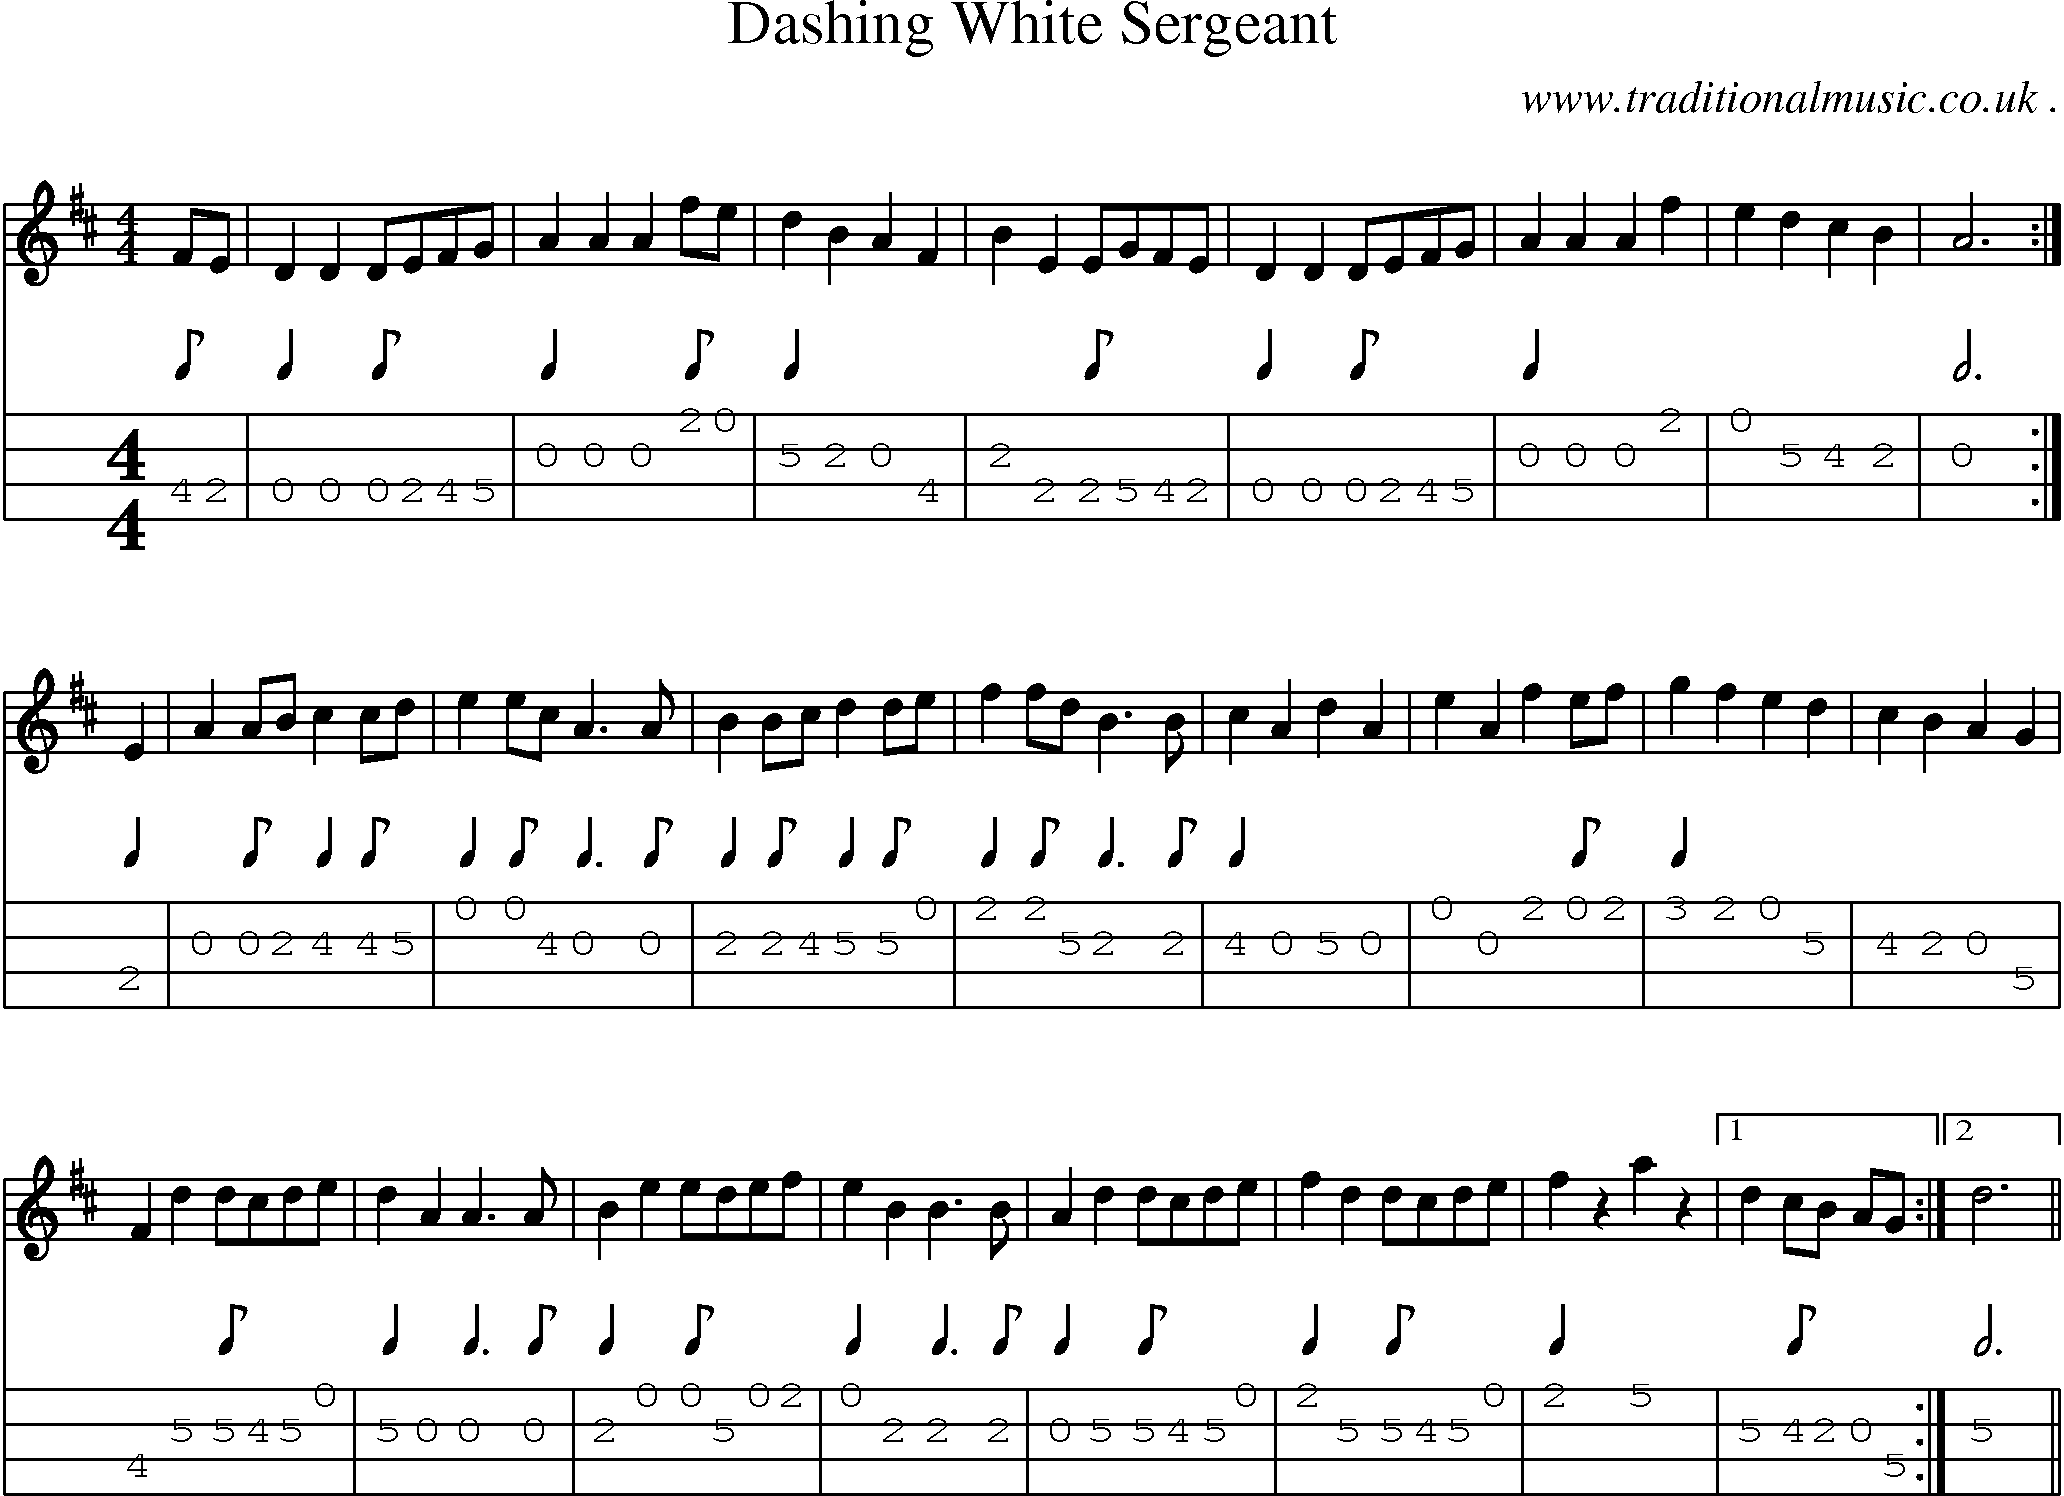 Sheet-music  score, Chords and Mandolin Tabs for Dashing White Sergeant